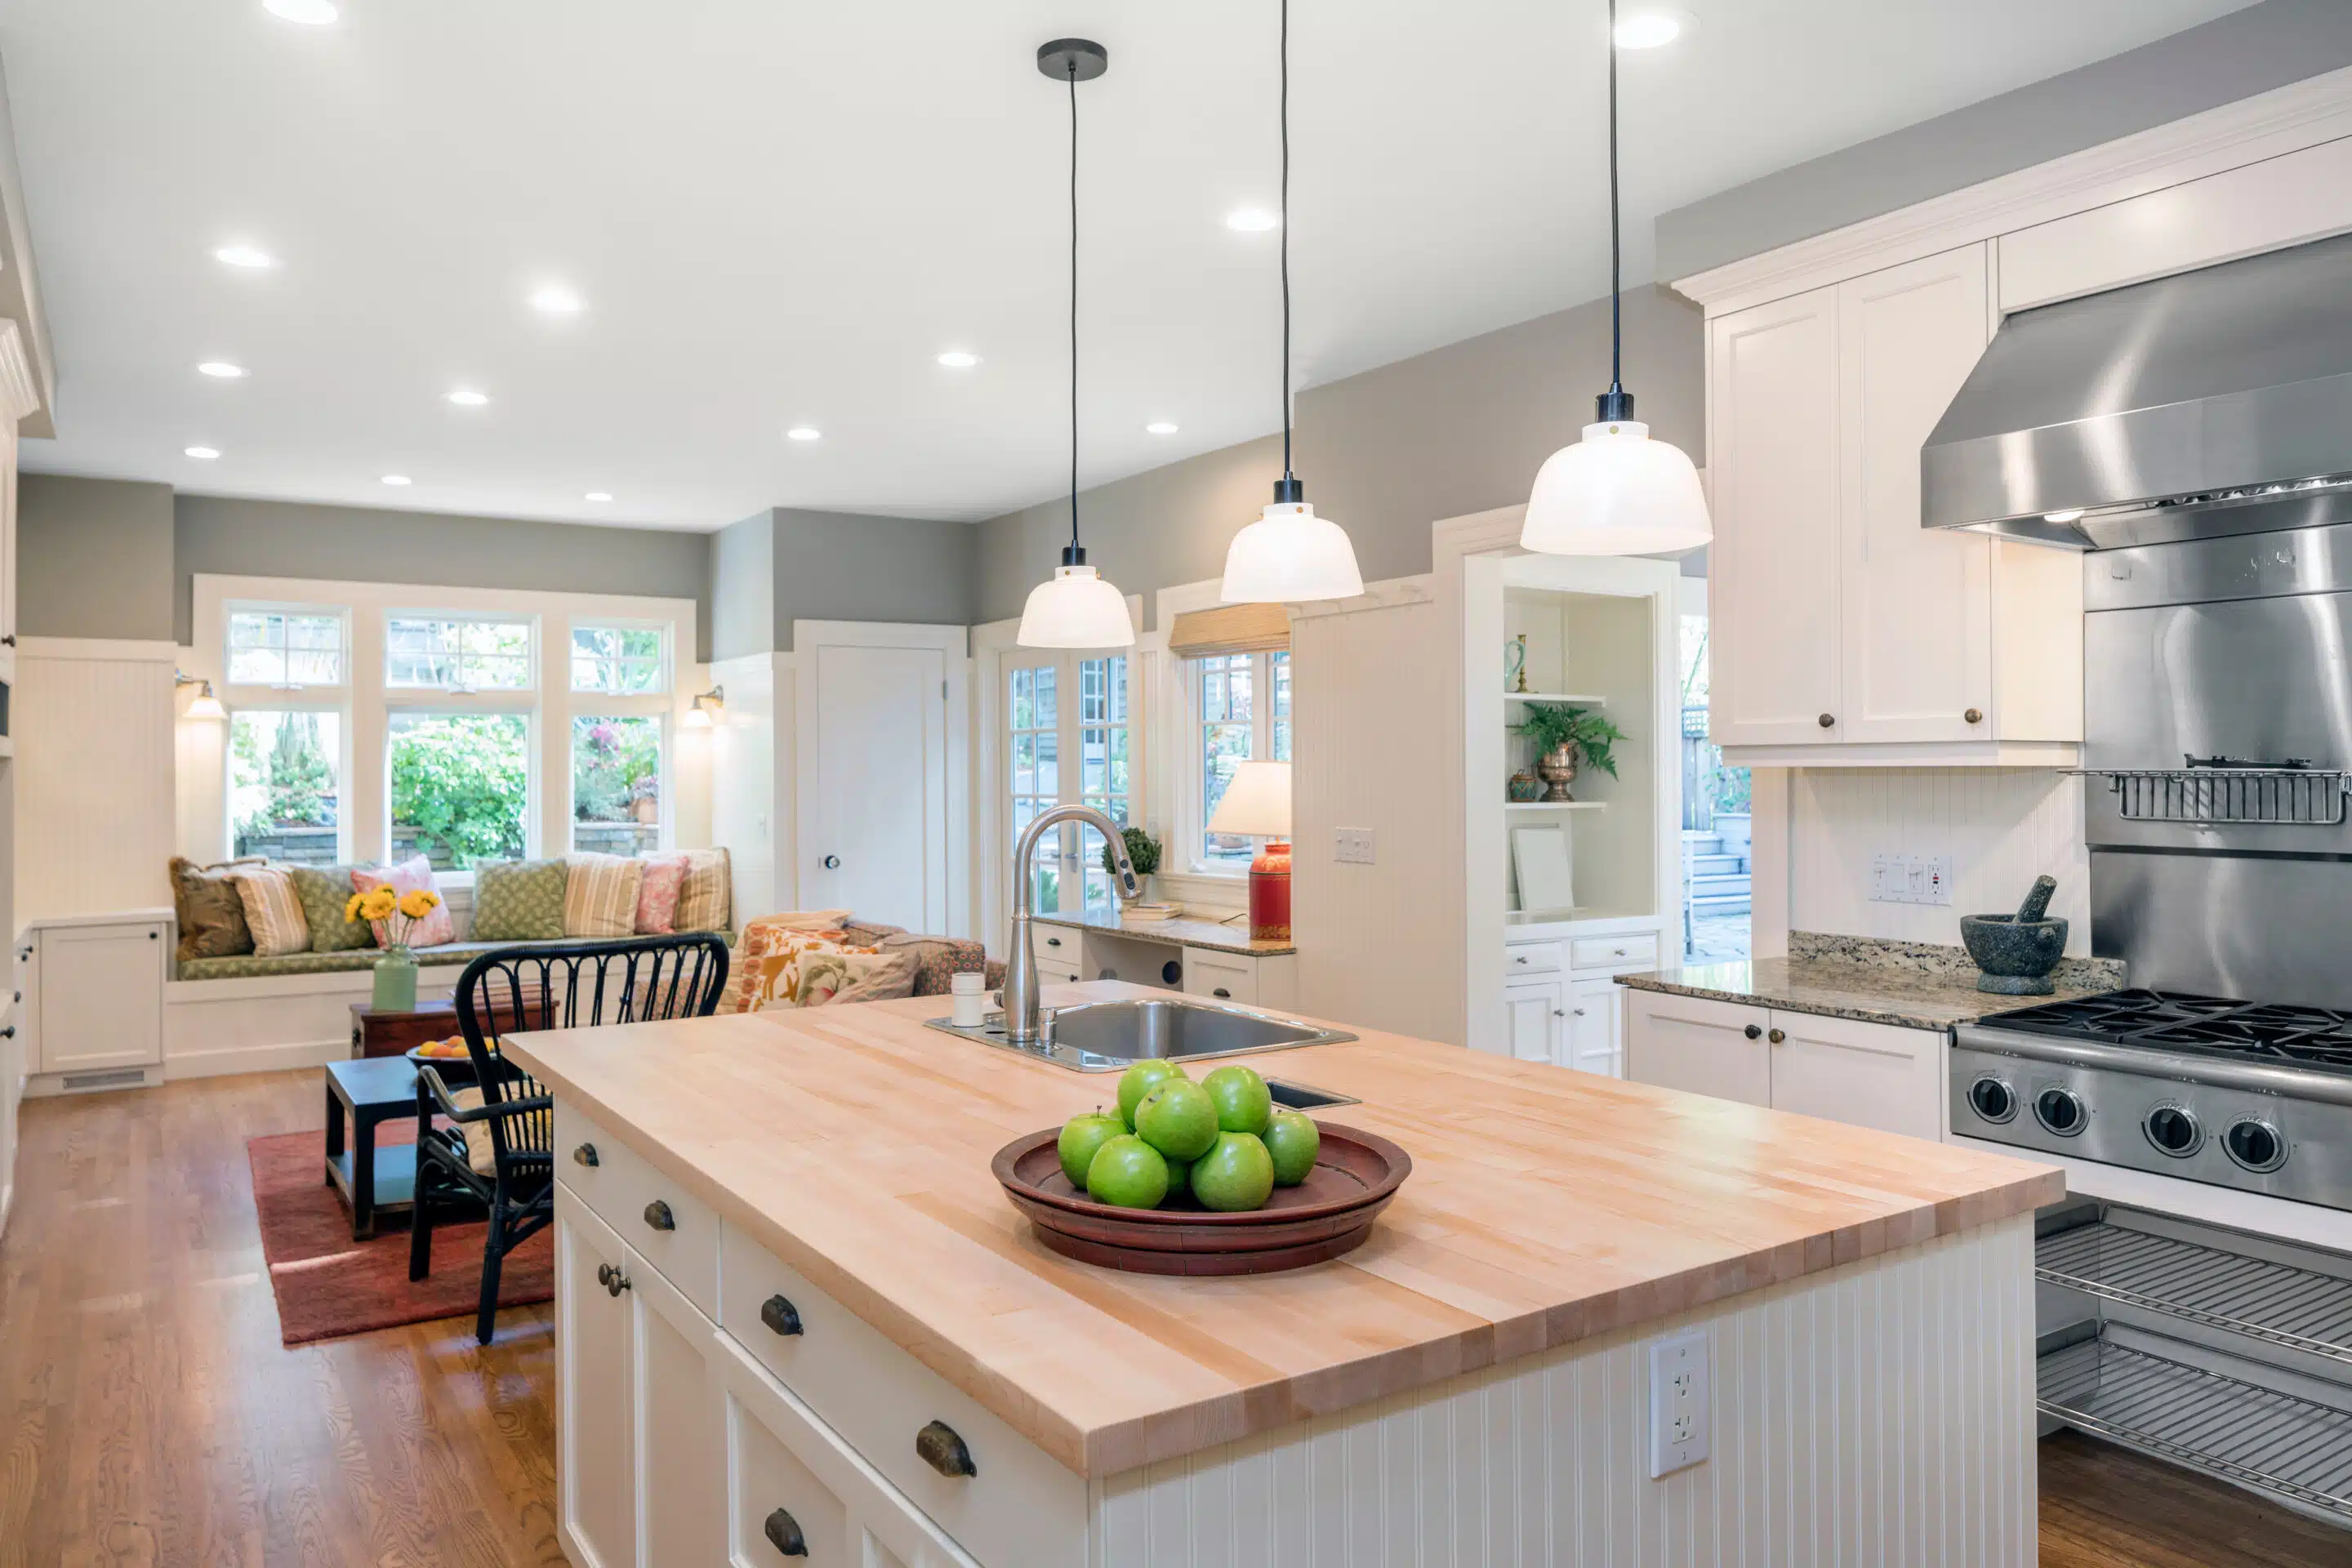 How to Stage Your Kitchen for a Home Sale